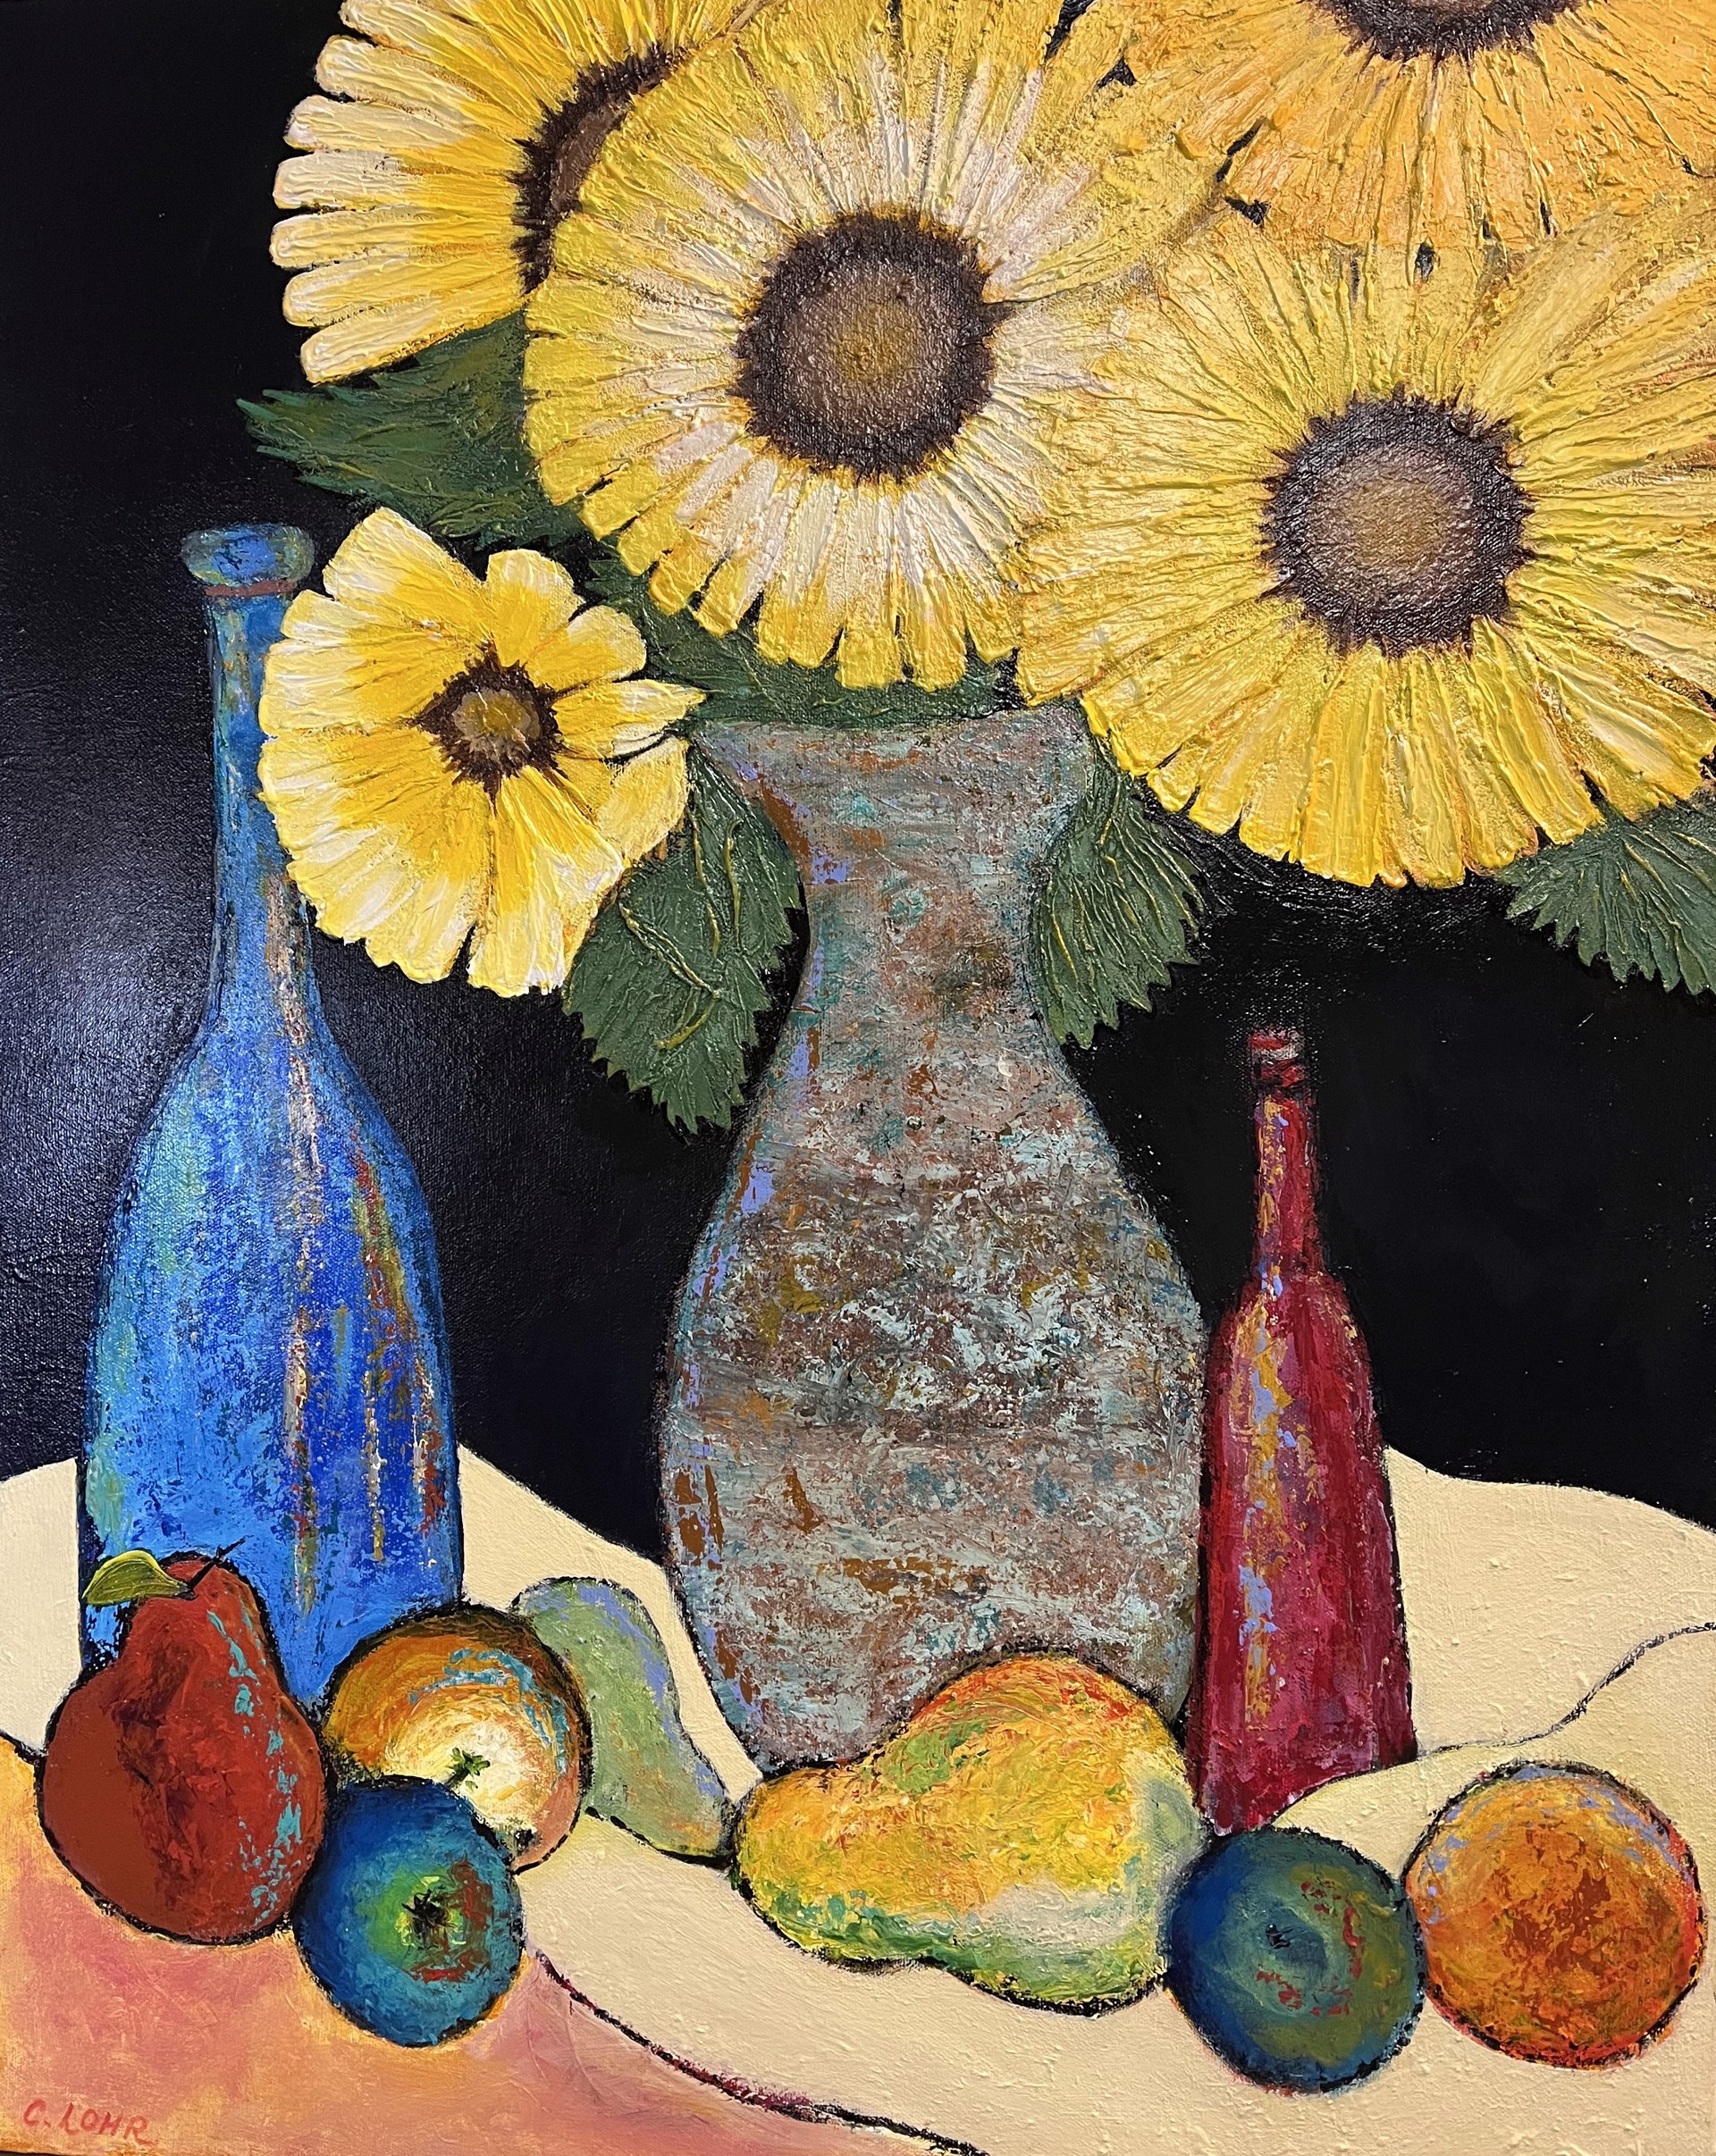 Sunflowers & Fruit Delight by Colleen Lohr